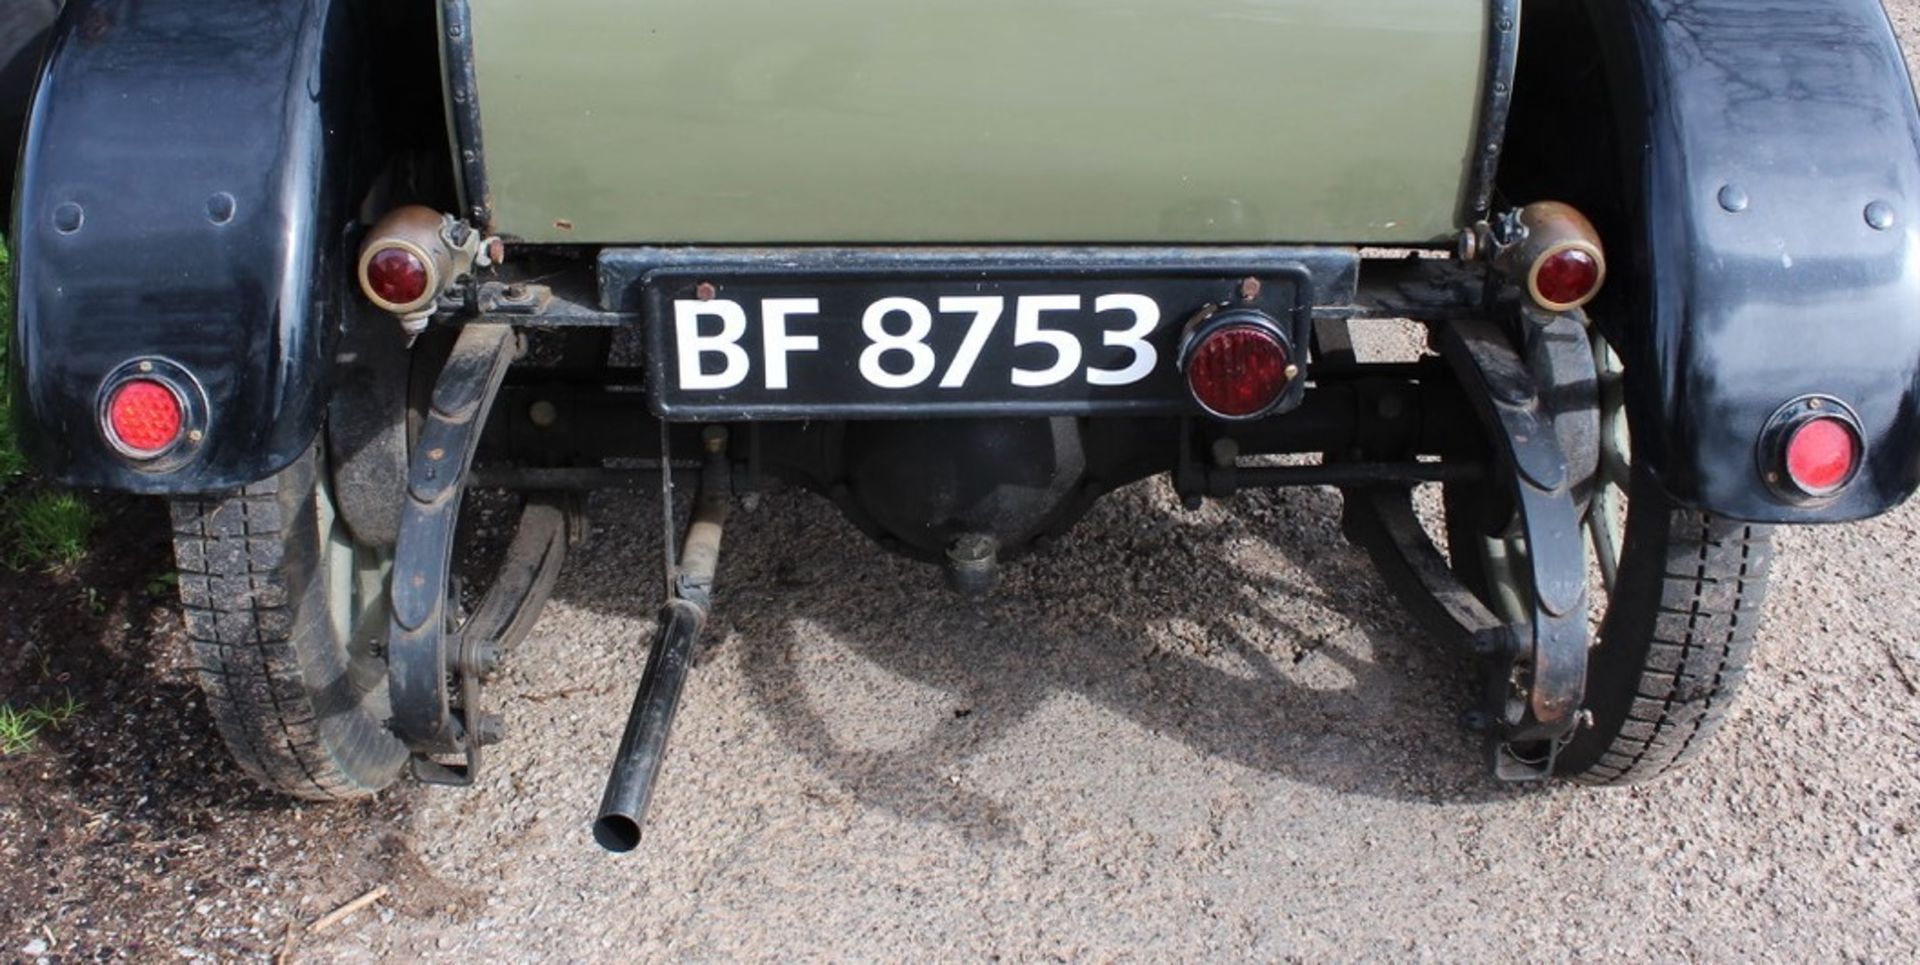 1921 MORRIS OXFORD ‘BULLNOSE’ DOCTOR'S COUPE Registration Number: BF 8753 Chassis Number: TBA - Image 10 of 19